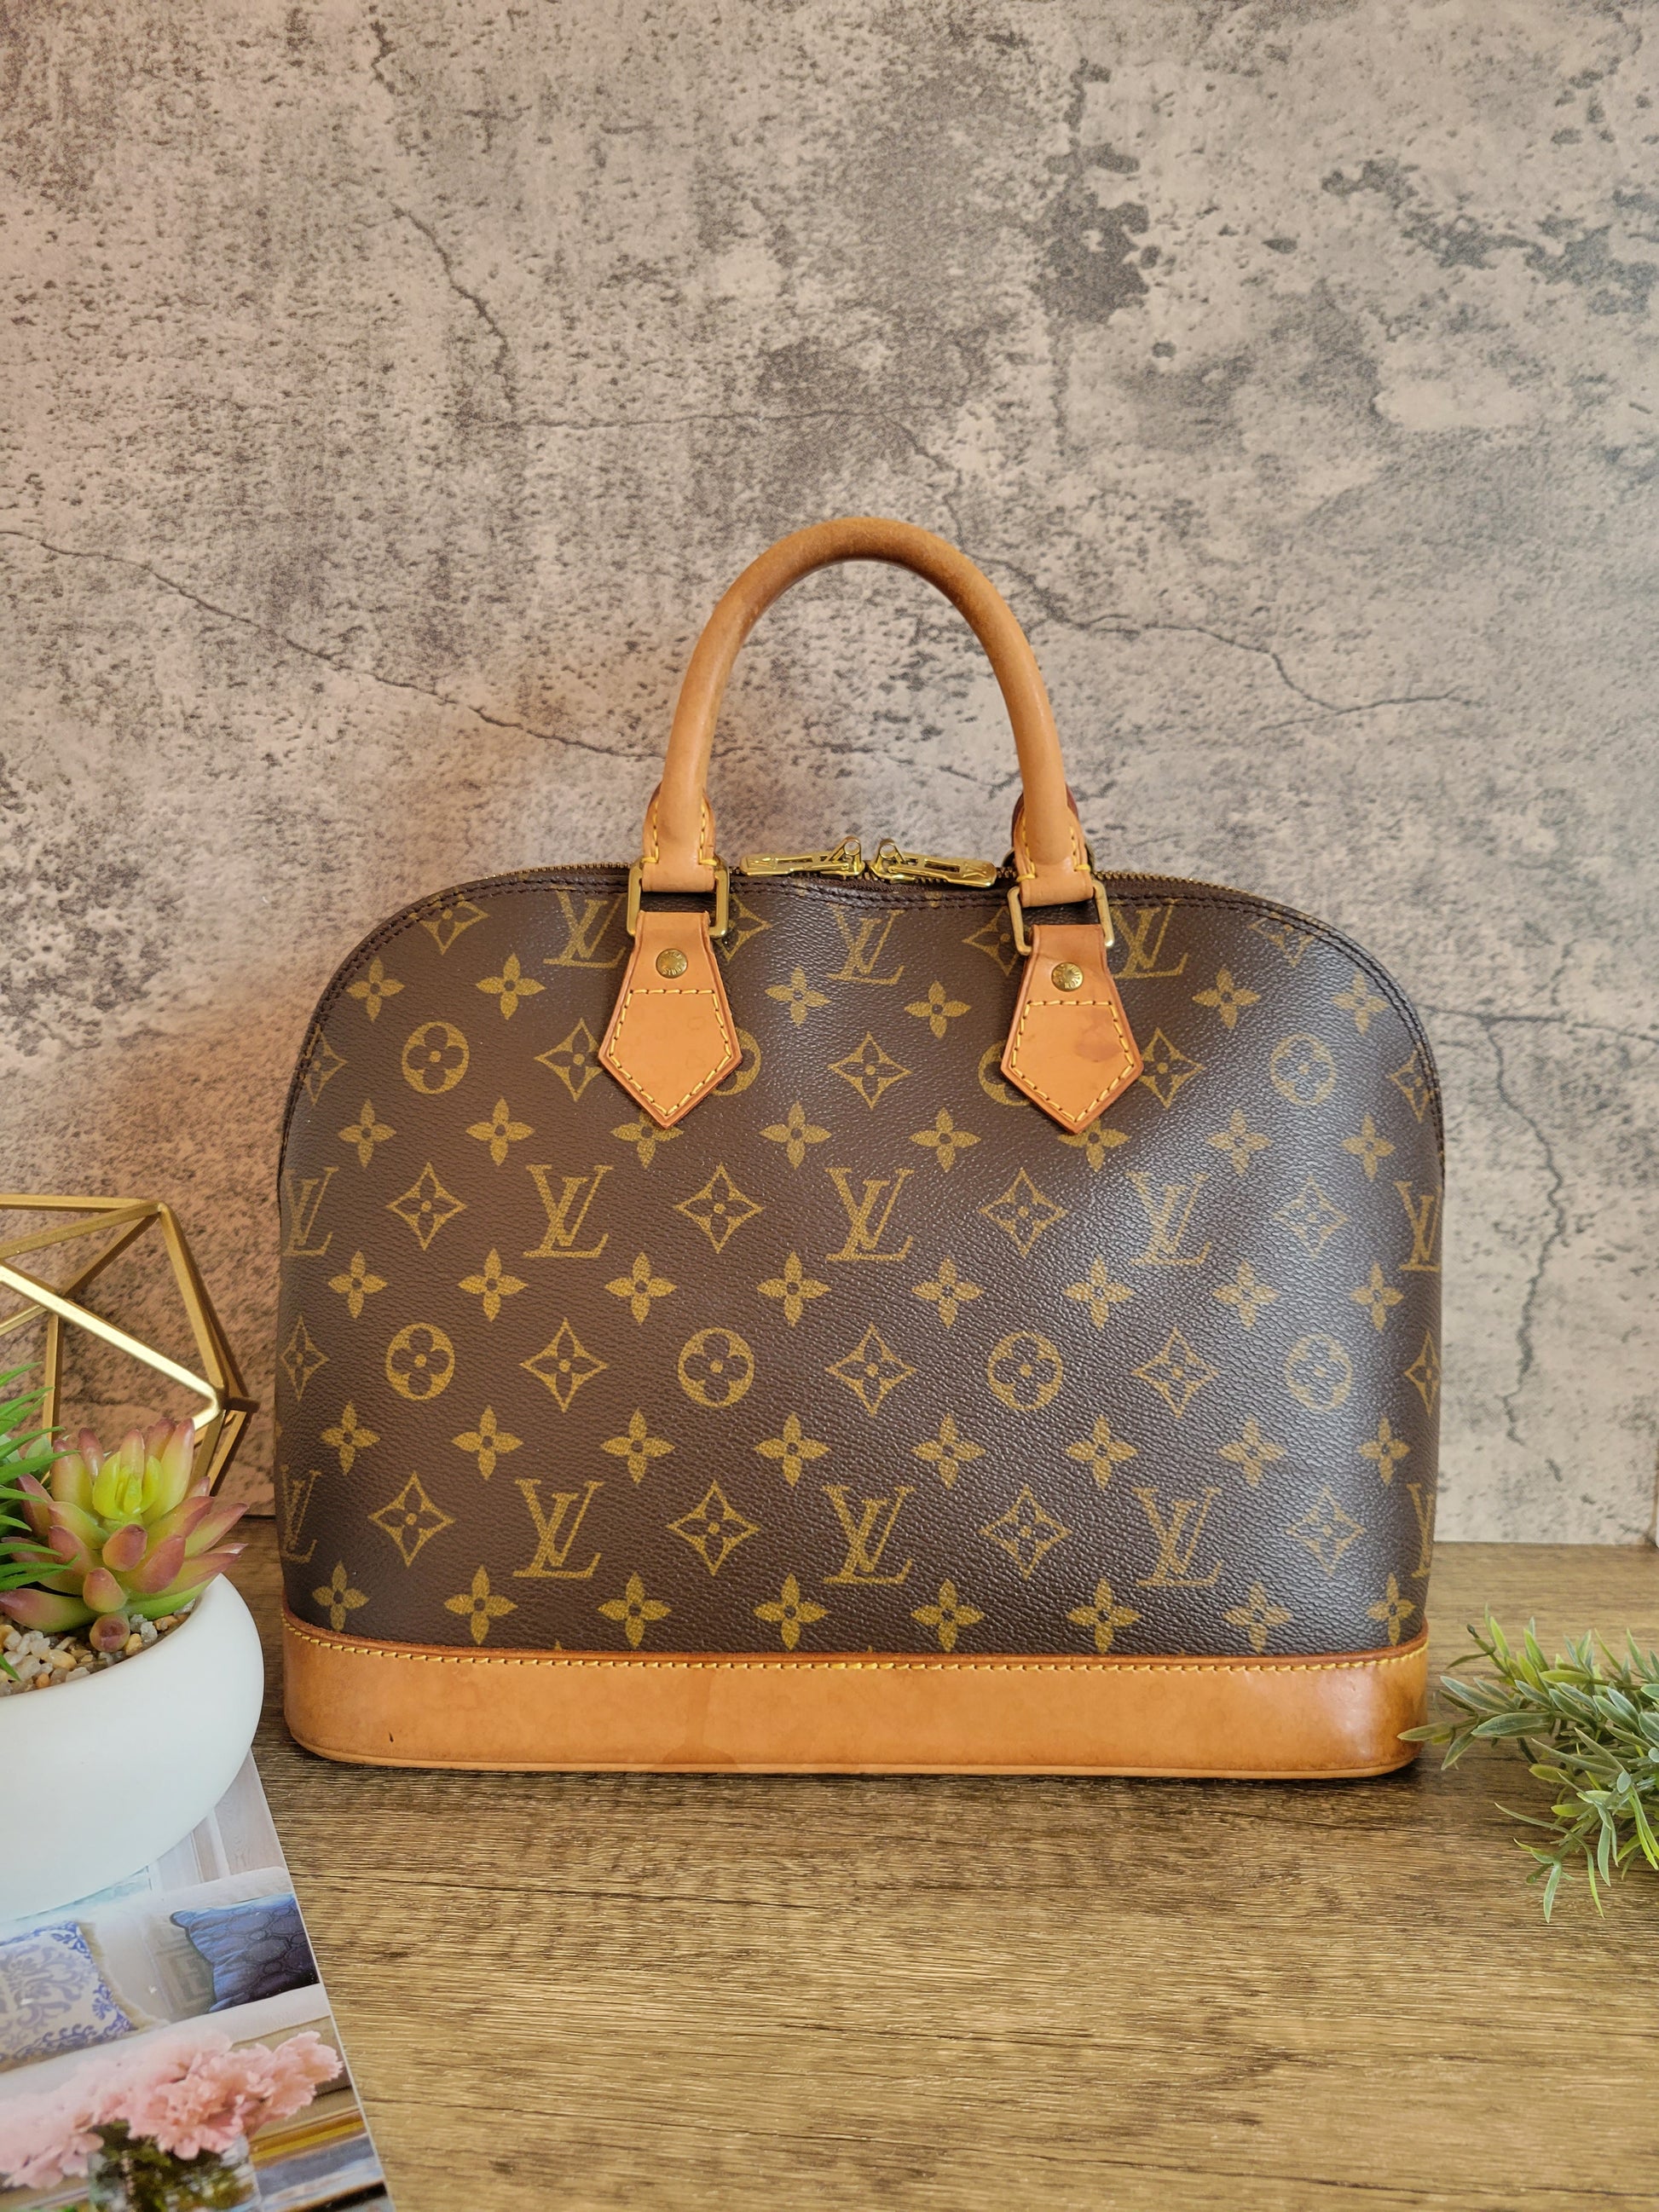 How to safely clean & condition your Louis Vuitton Alma Pm 